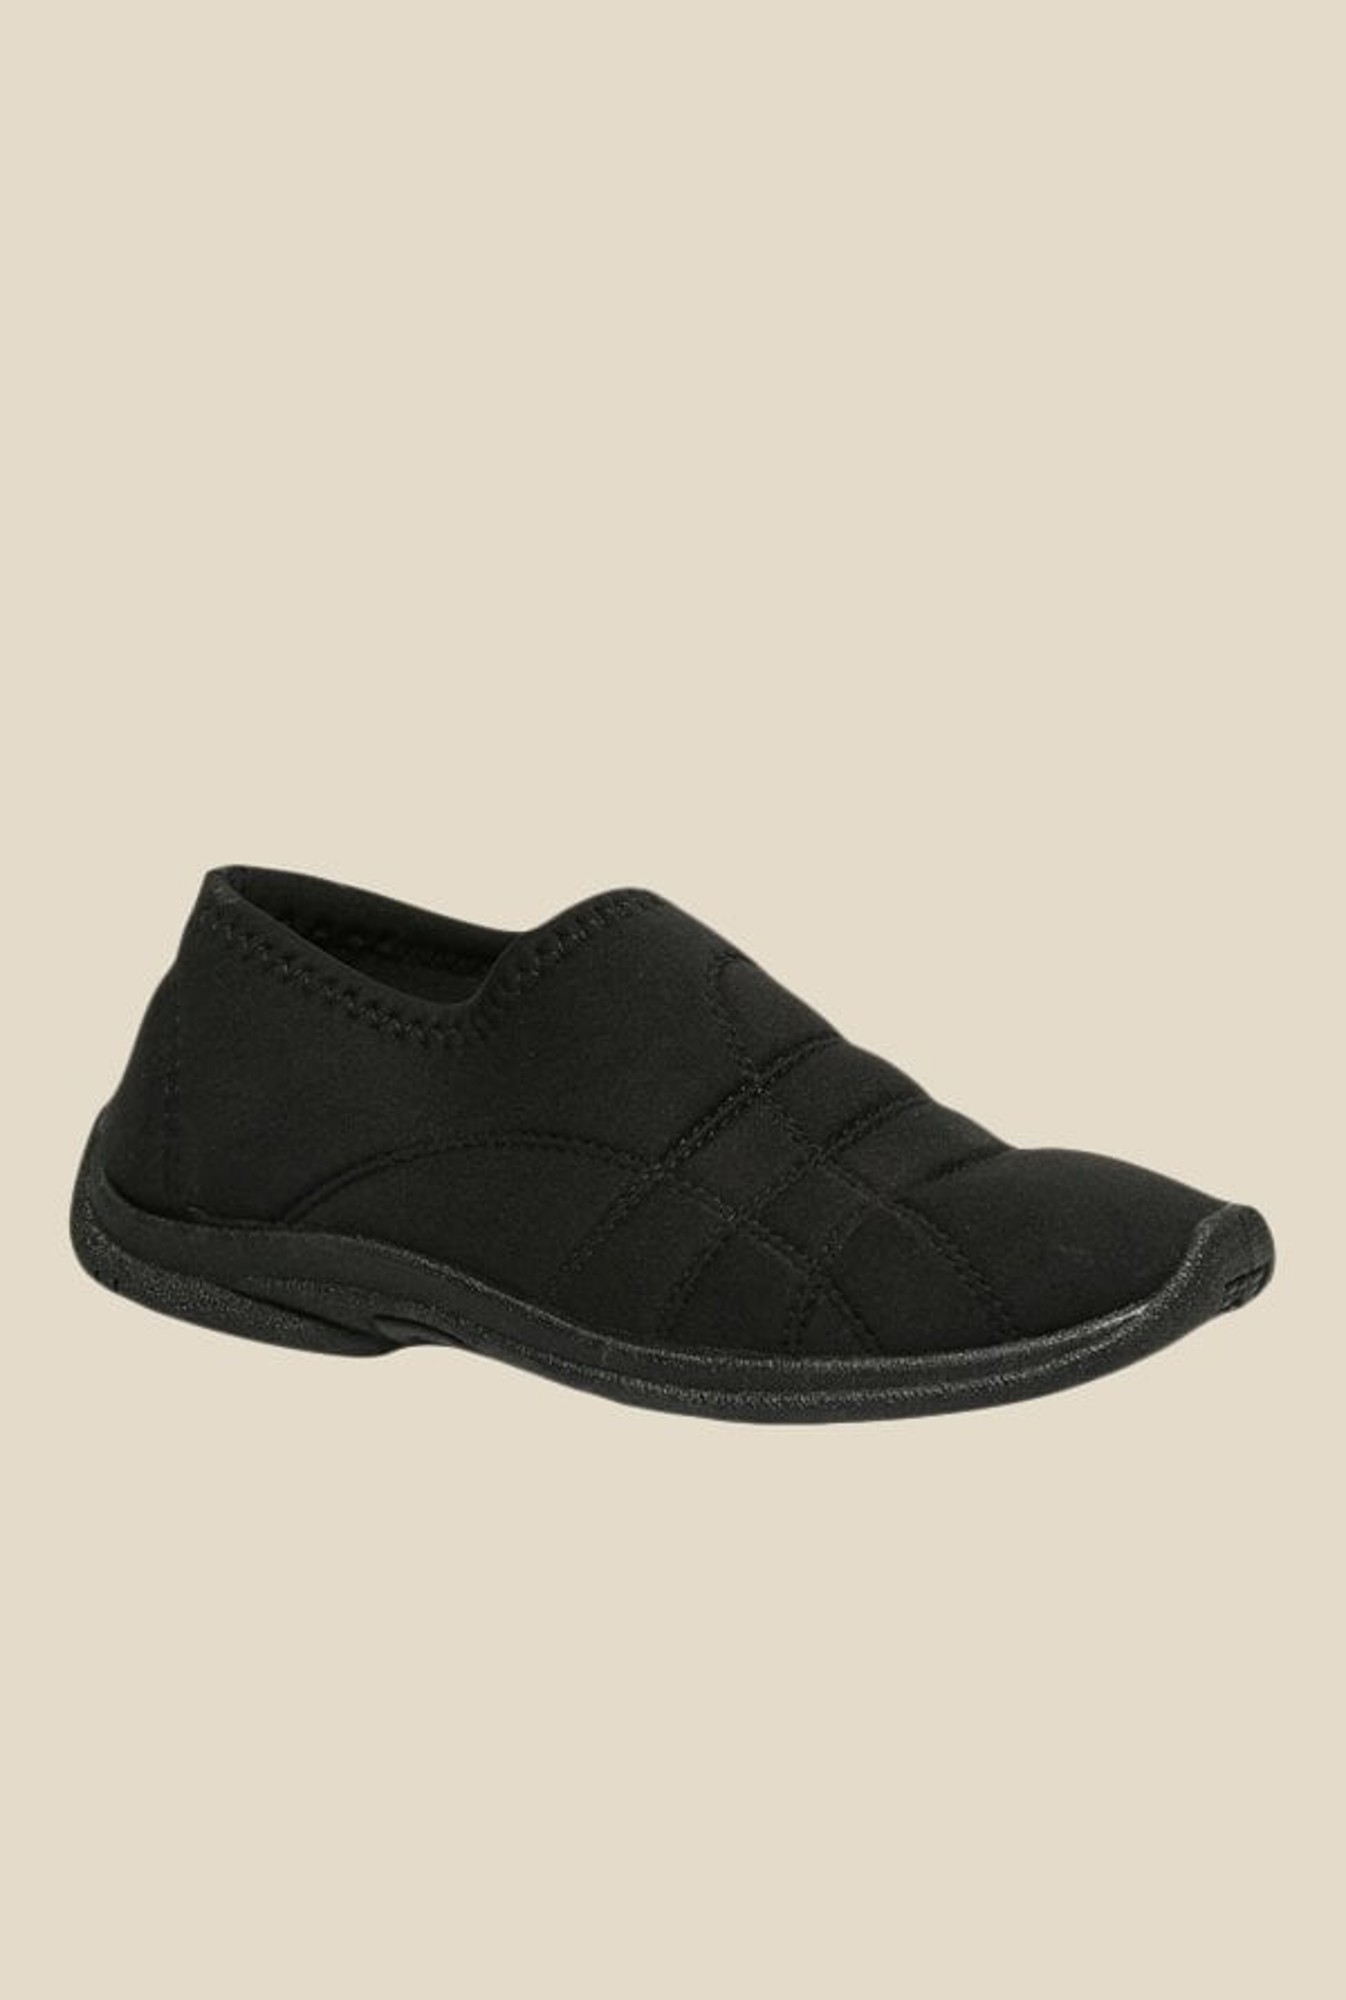 Buy Bata Softy Black Casual Shoes for 